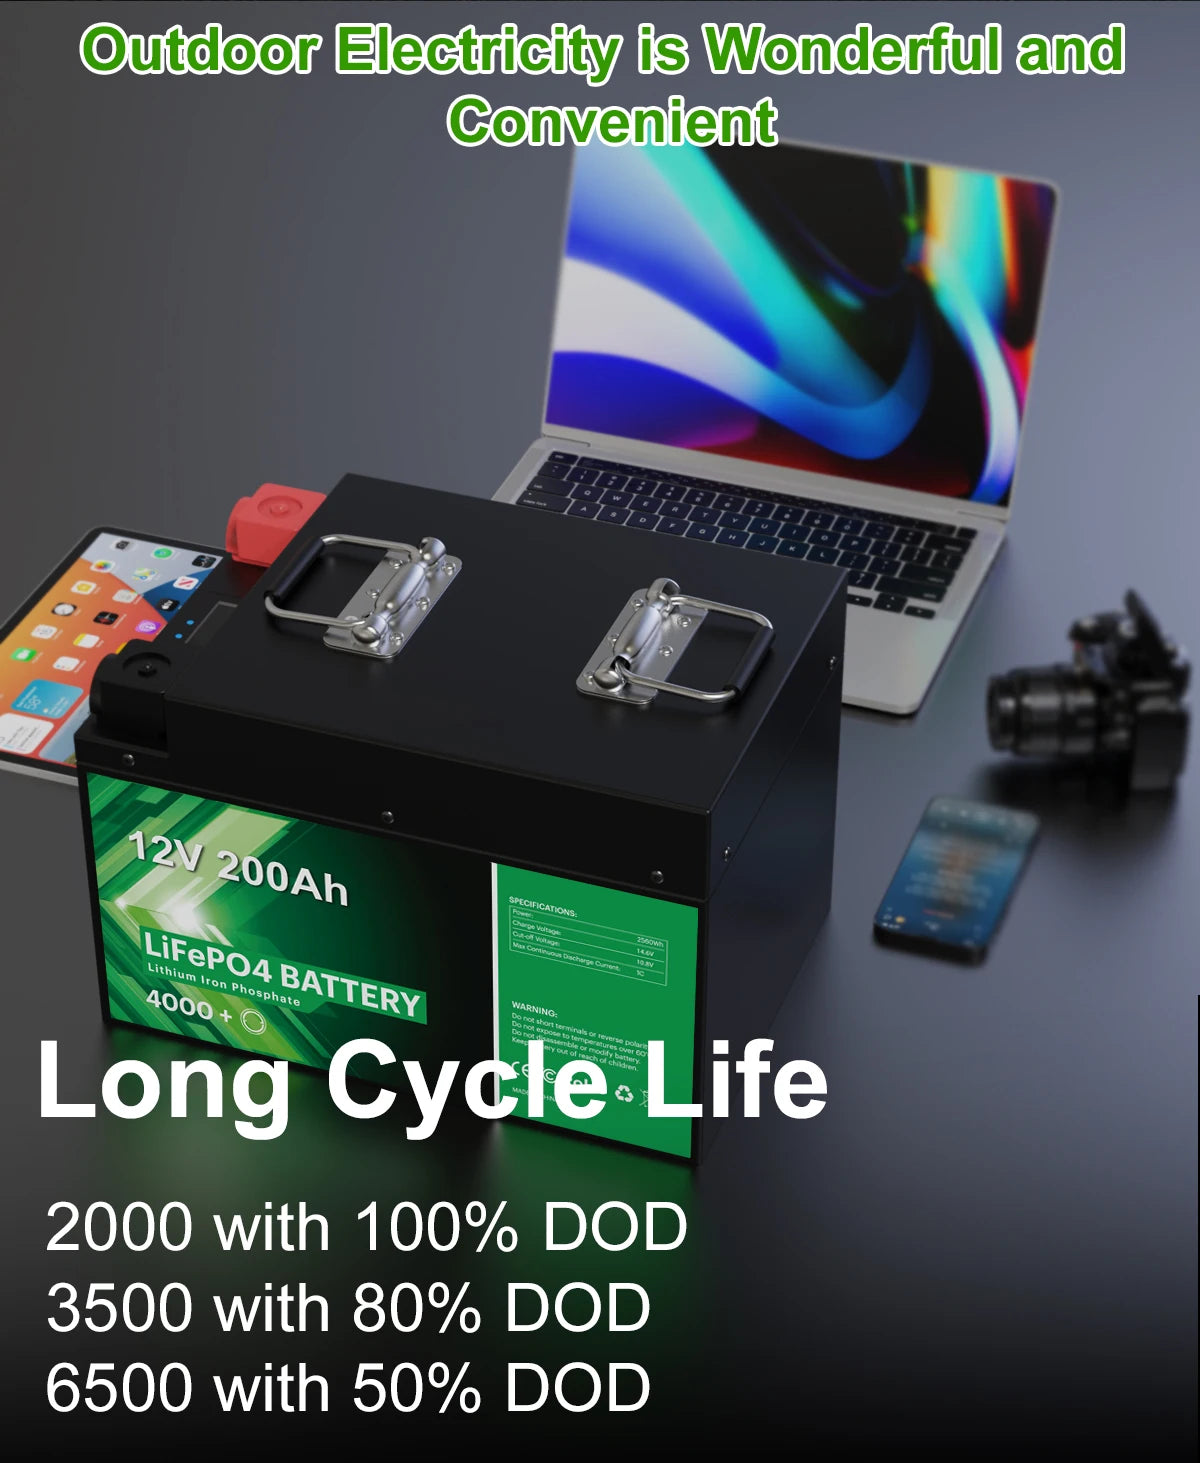 High-performance 12V 200Ah LiFePO4 battery pack for long cycle life, with BMS and CAA standards met.